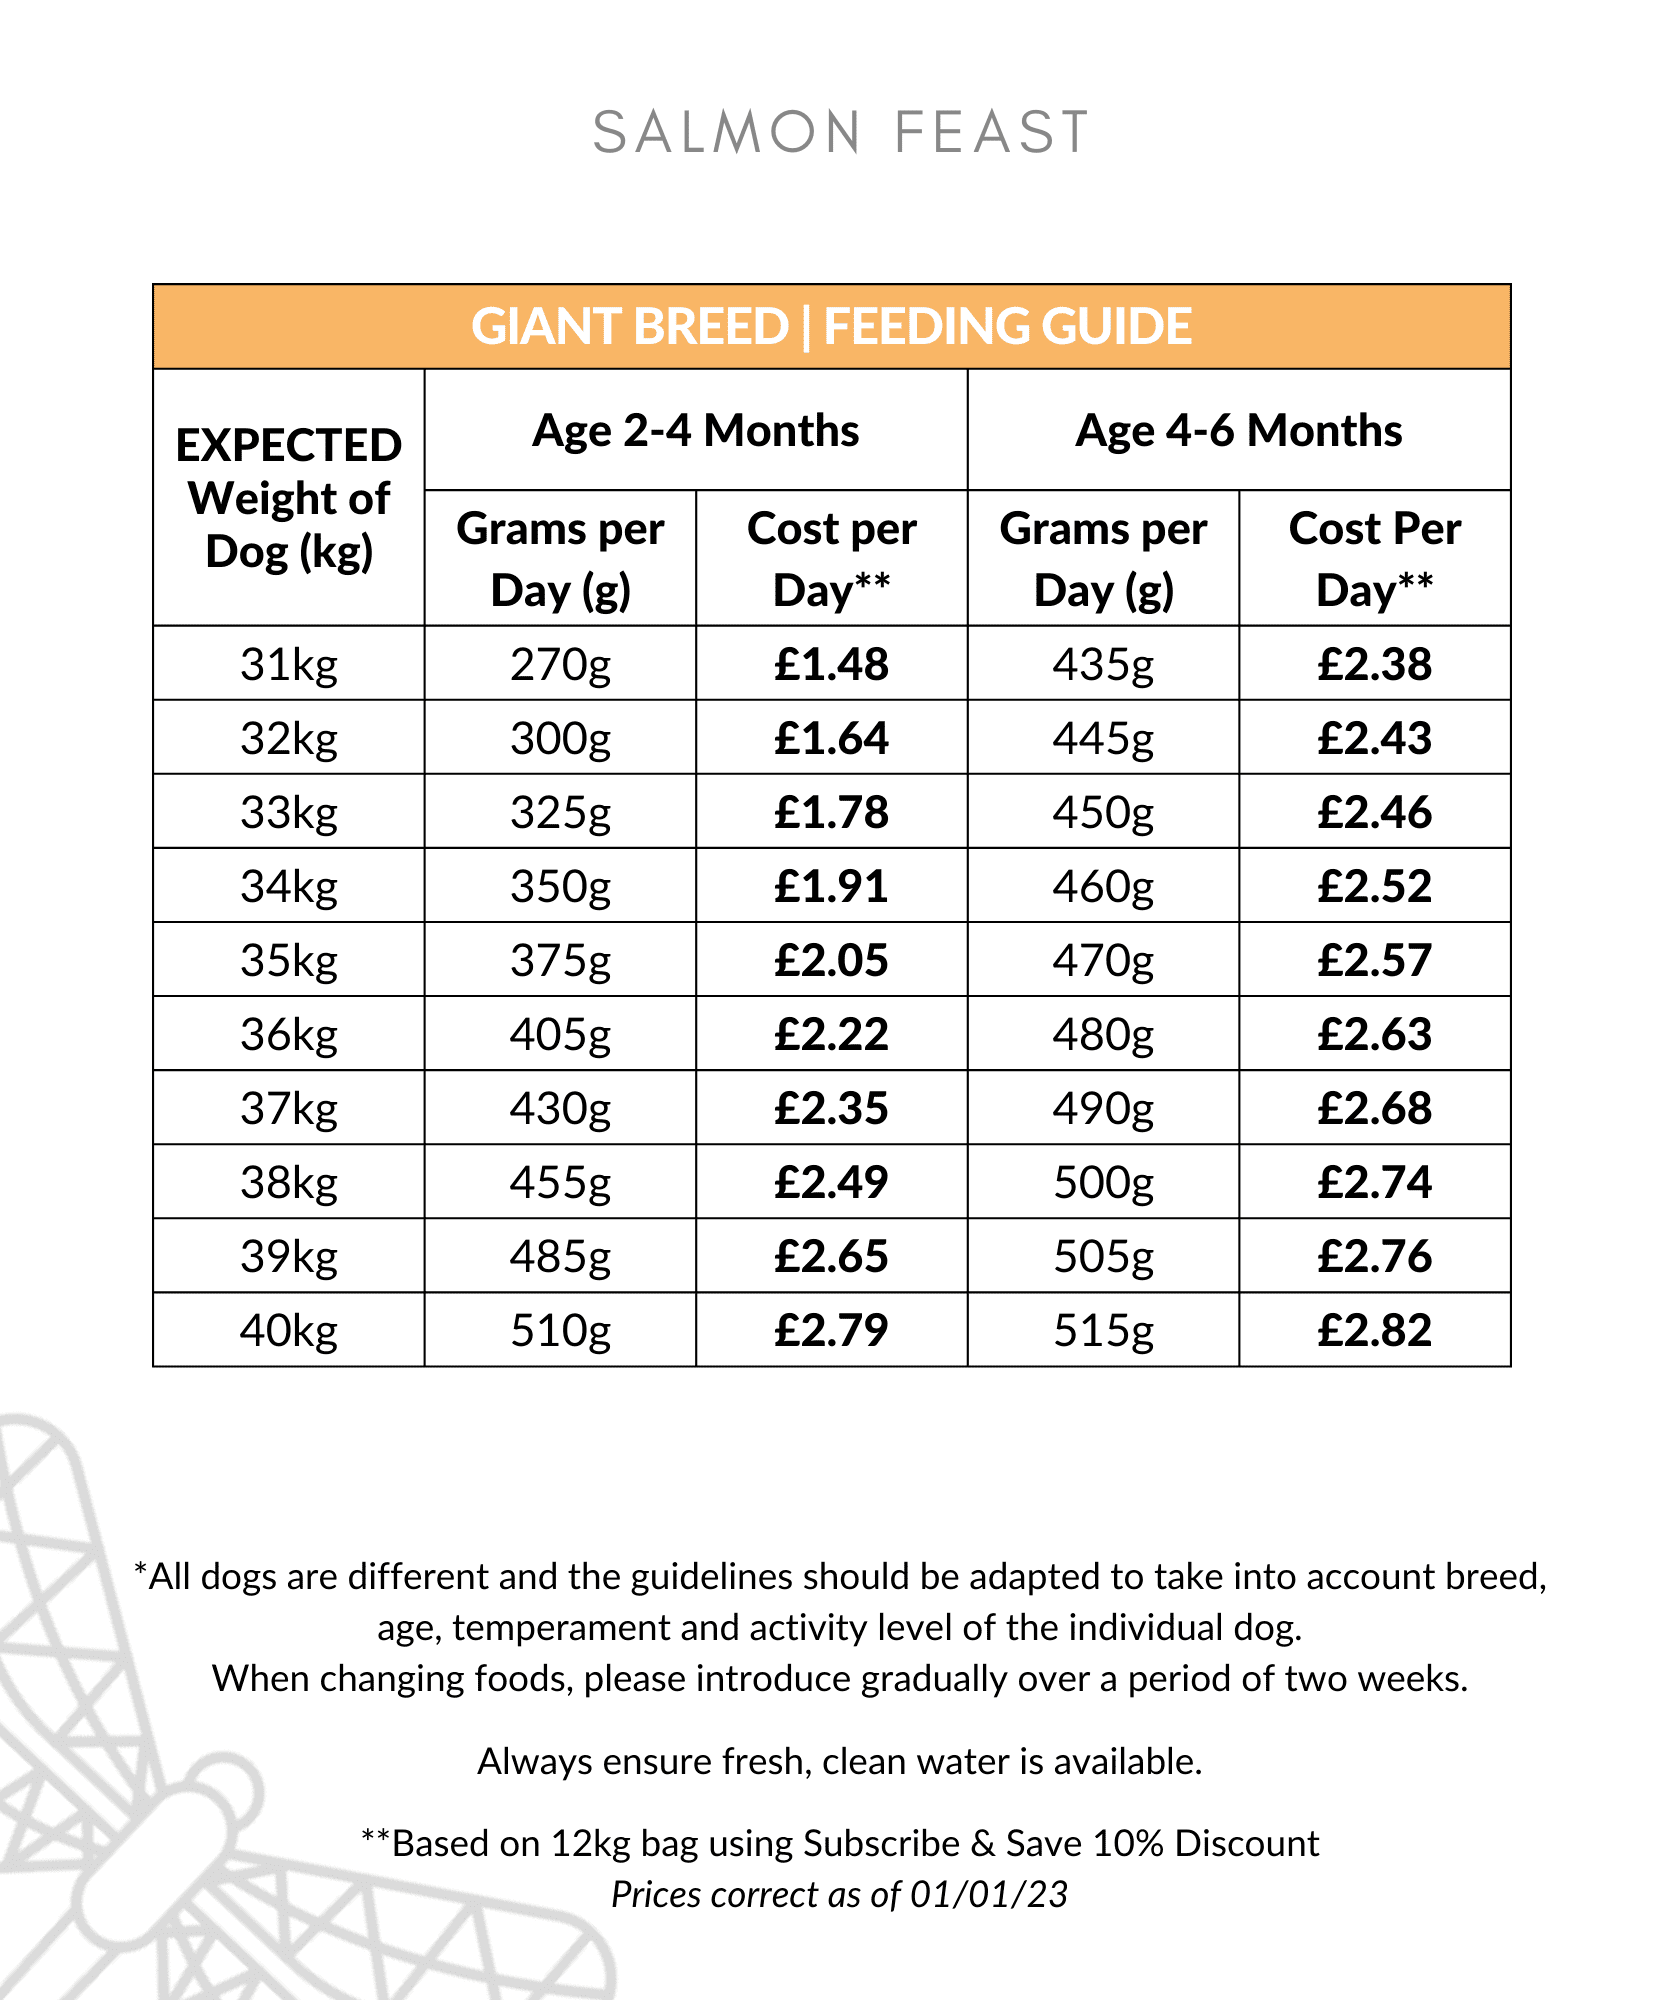 Salmon Feast Large Breed Puppy Food Feeding Guide 31-40kg up to 6 months